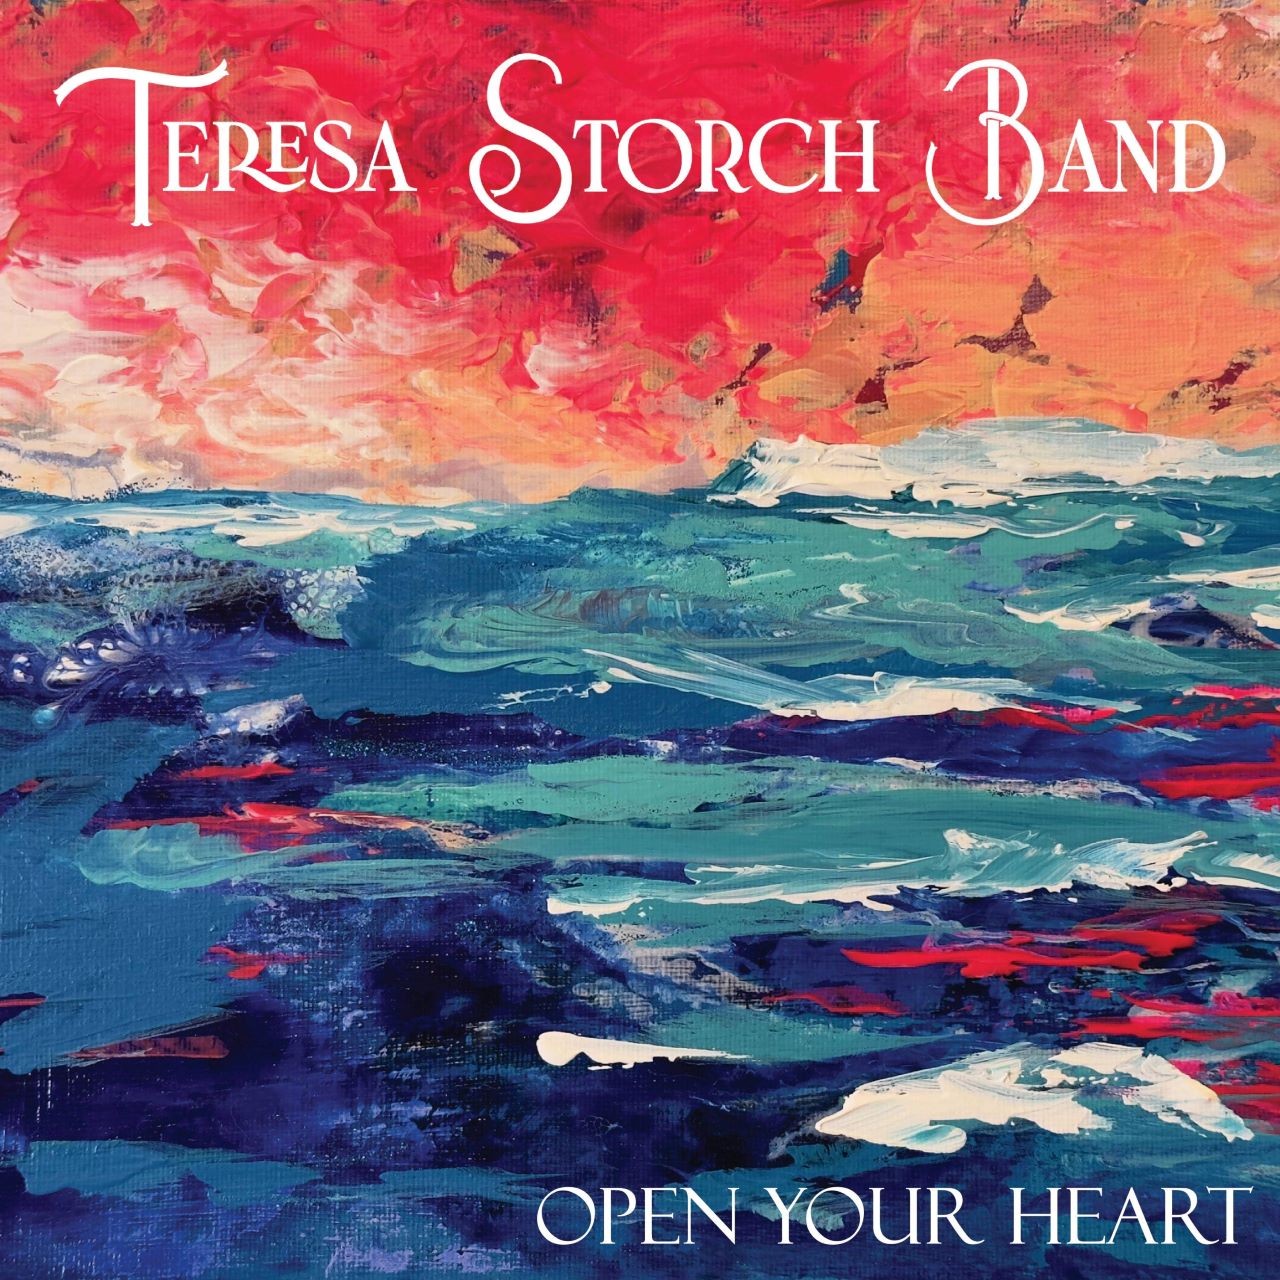 Teresa Storch Band – Open Your Heart cover album